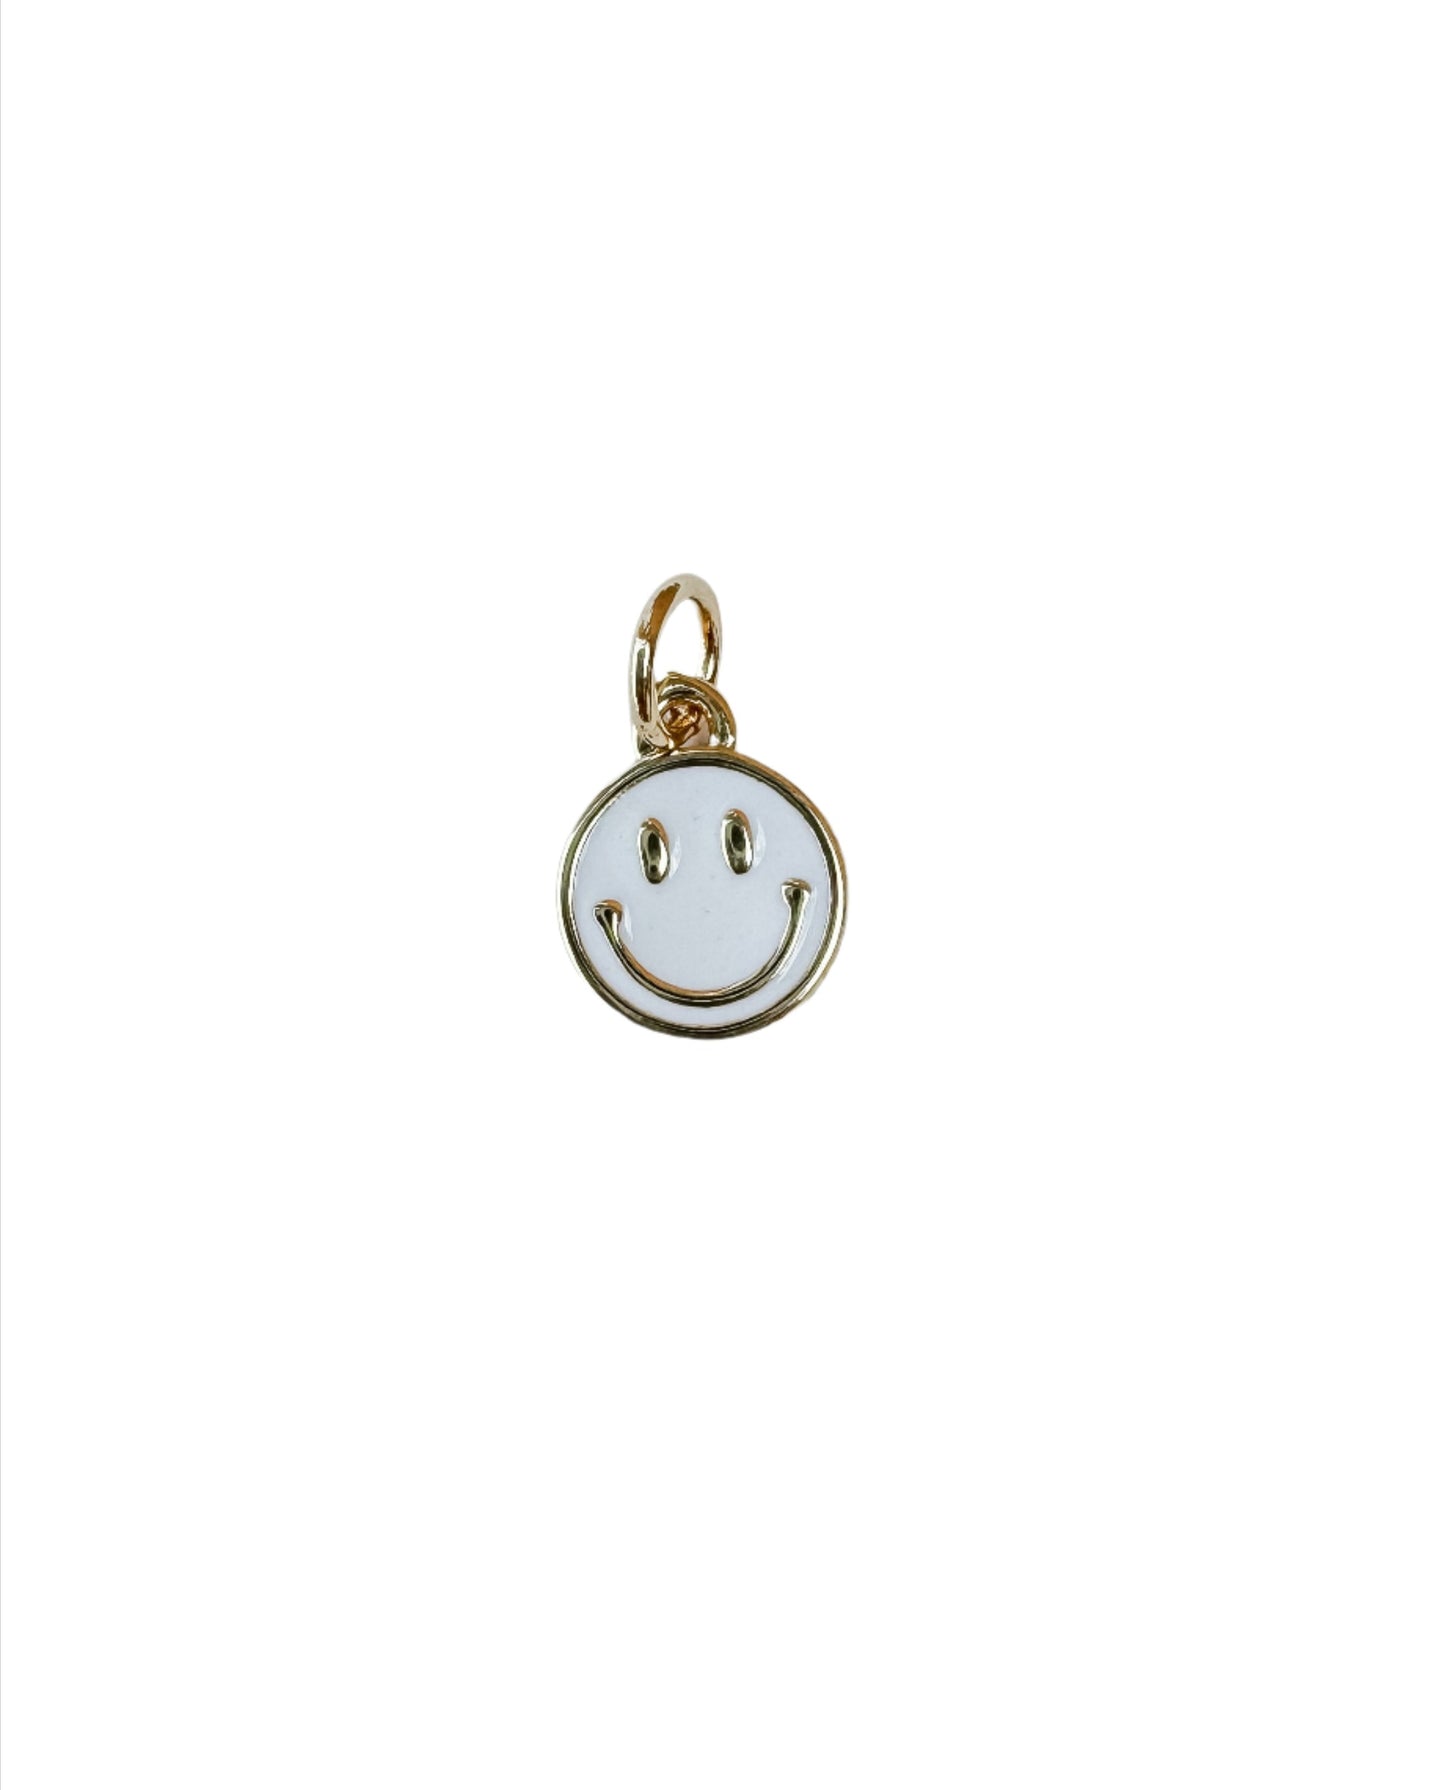 Enamel Happy Face Charms (Small)